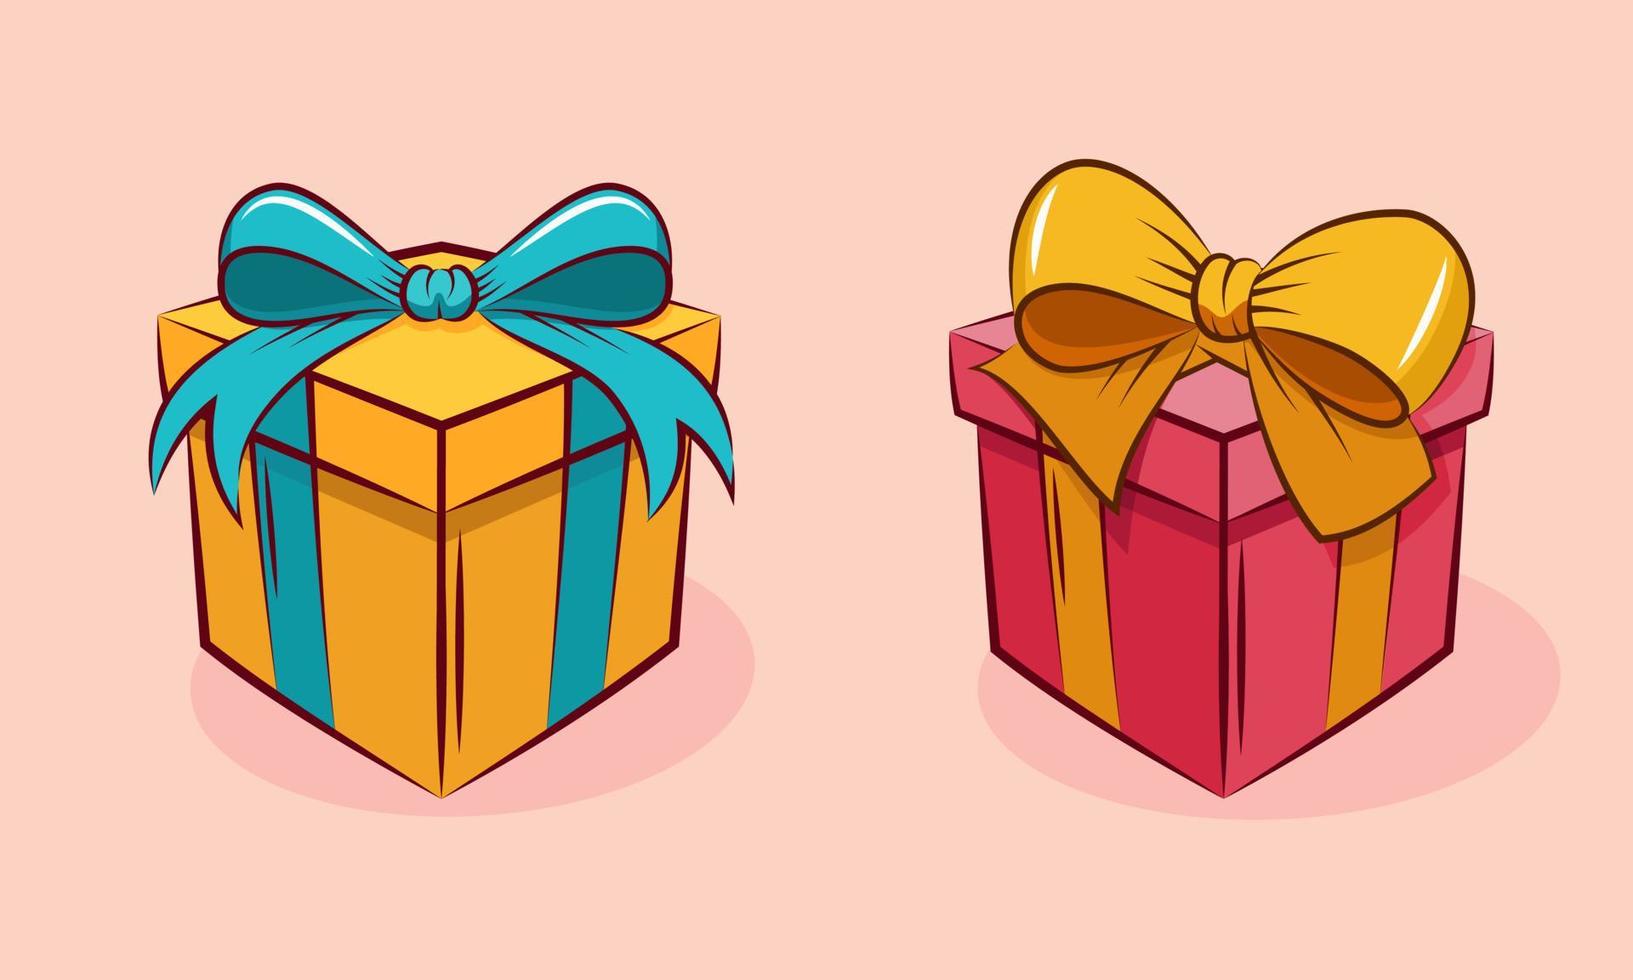 Flat vector illustration of gift box in cartoon style. Parcel box with colorful ribbon. Suitable for design element of celebration, happy holiday and christmas, and birthday party.